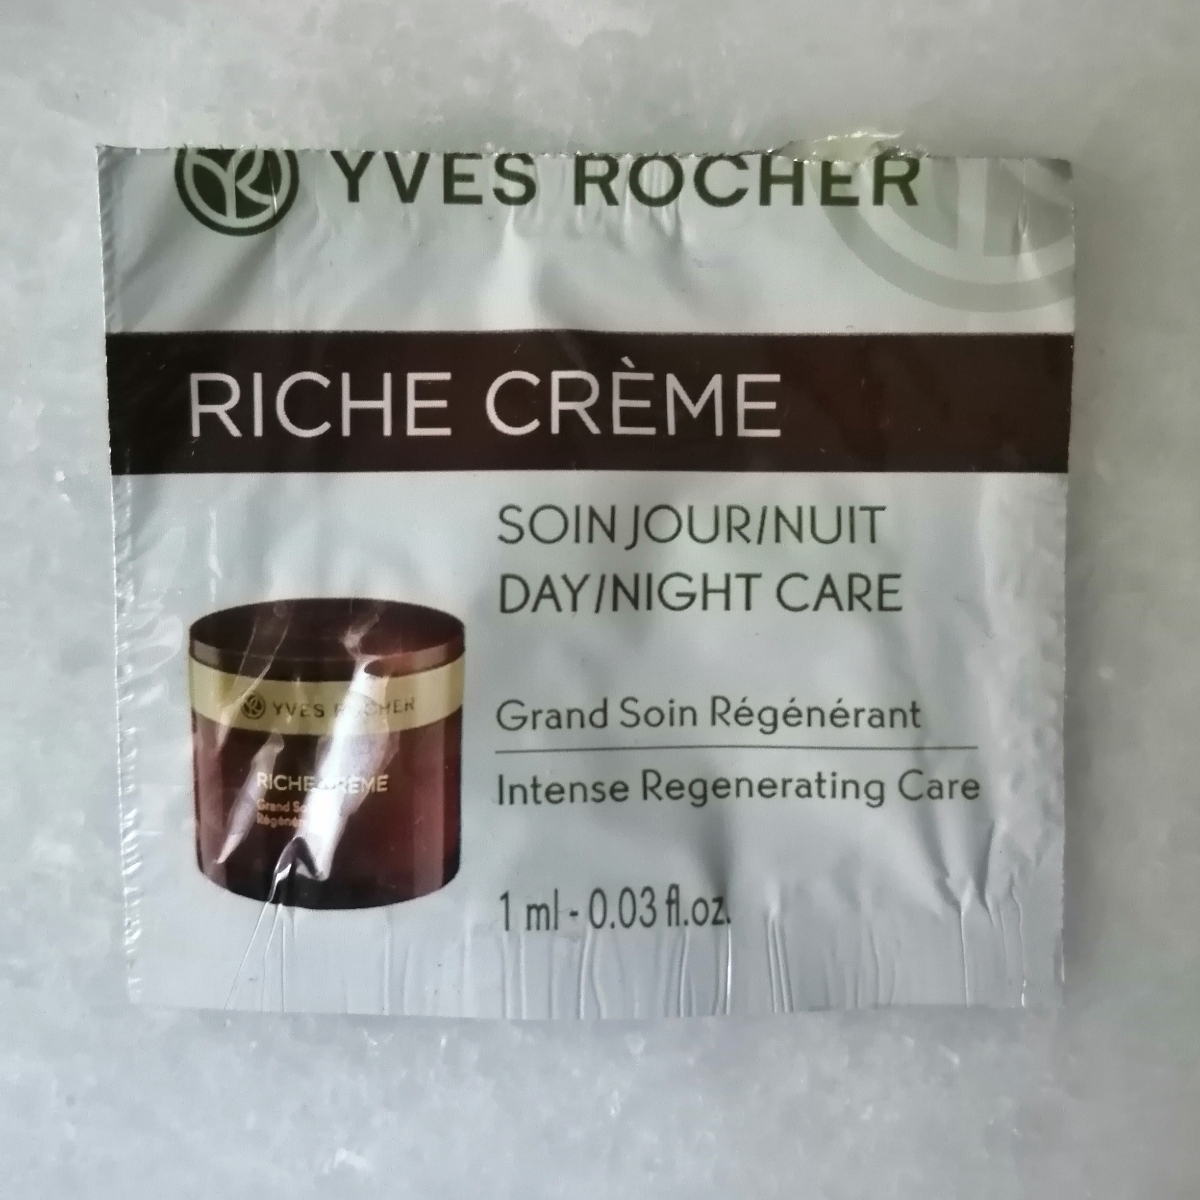 Yves rocher riche creme day/night care Reviews | abillion